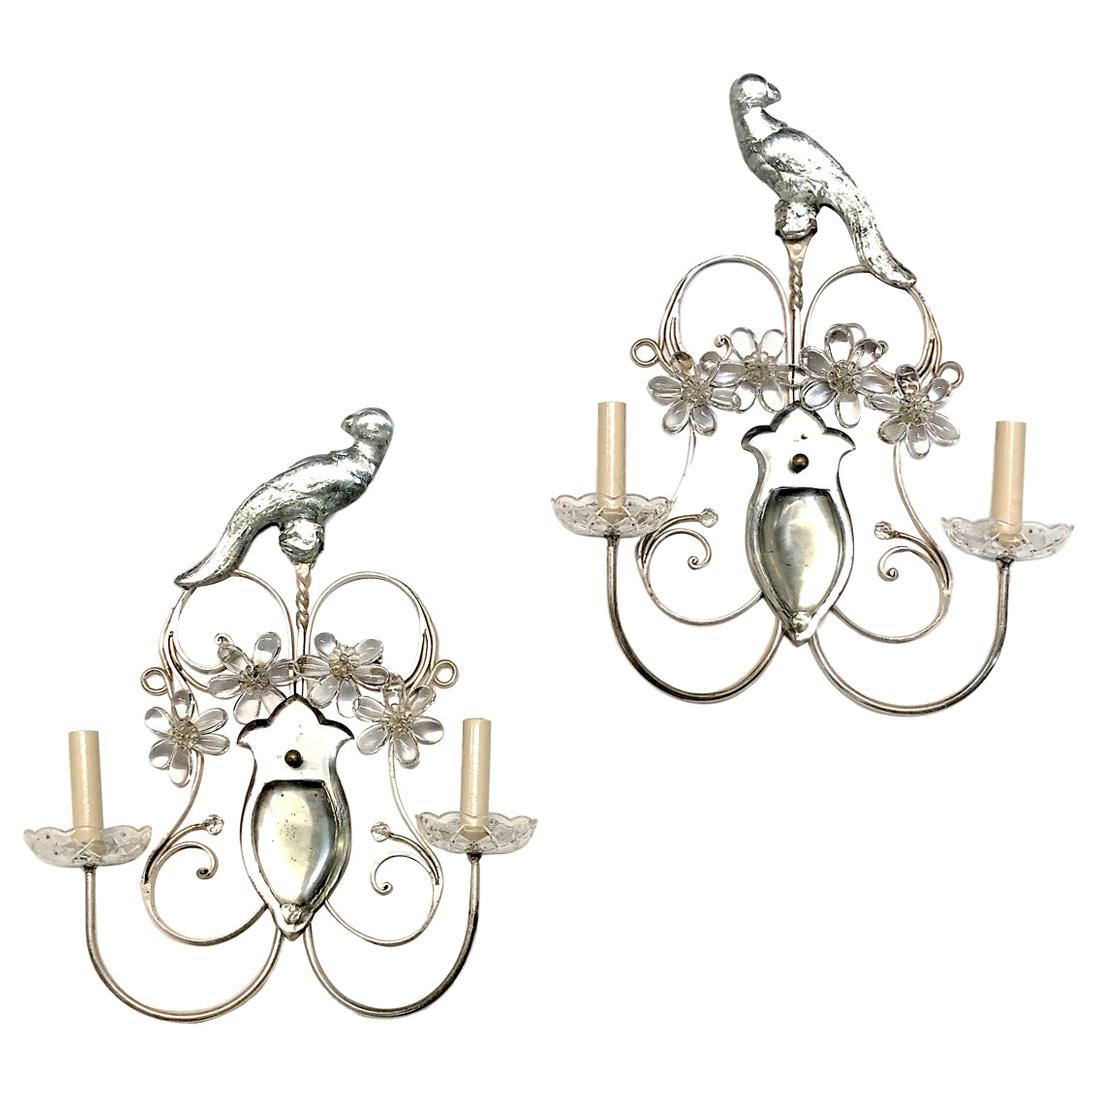 Pair of Silver Plated Parrot Sconces